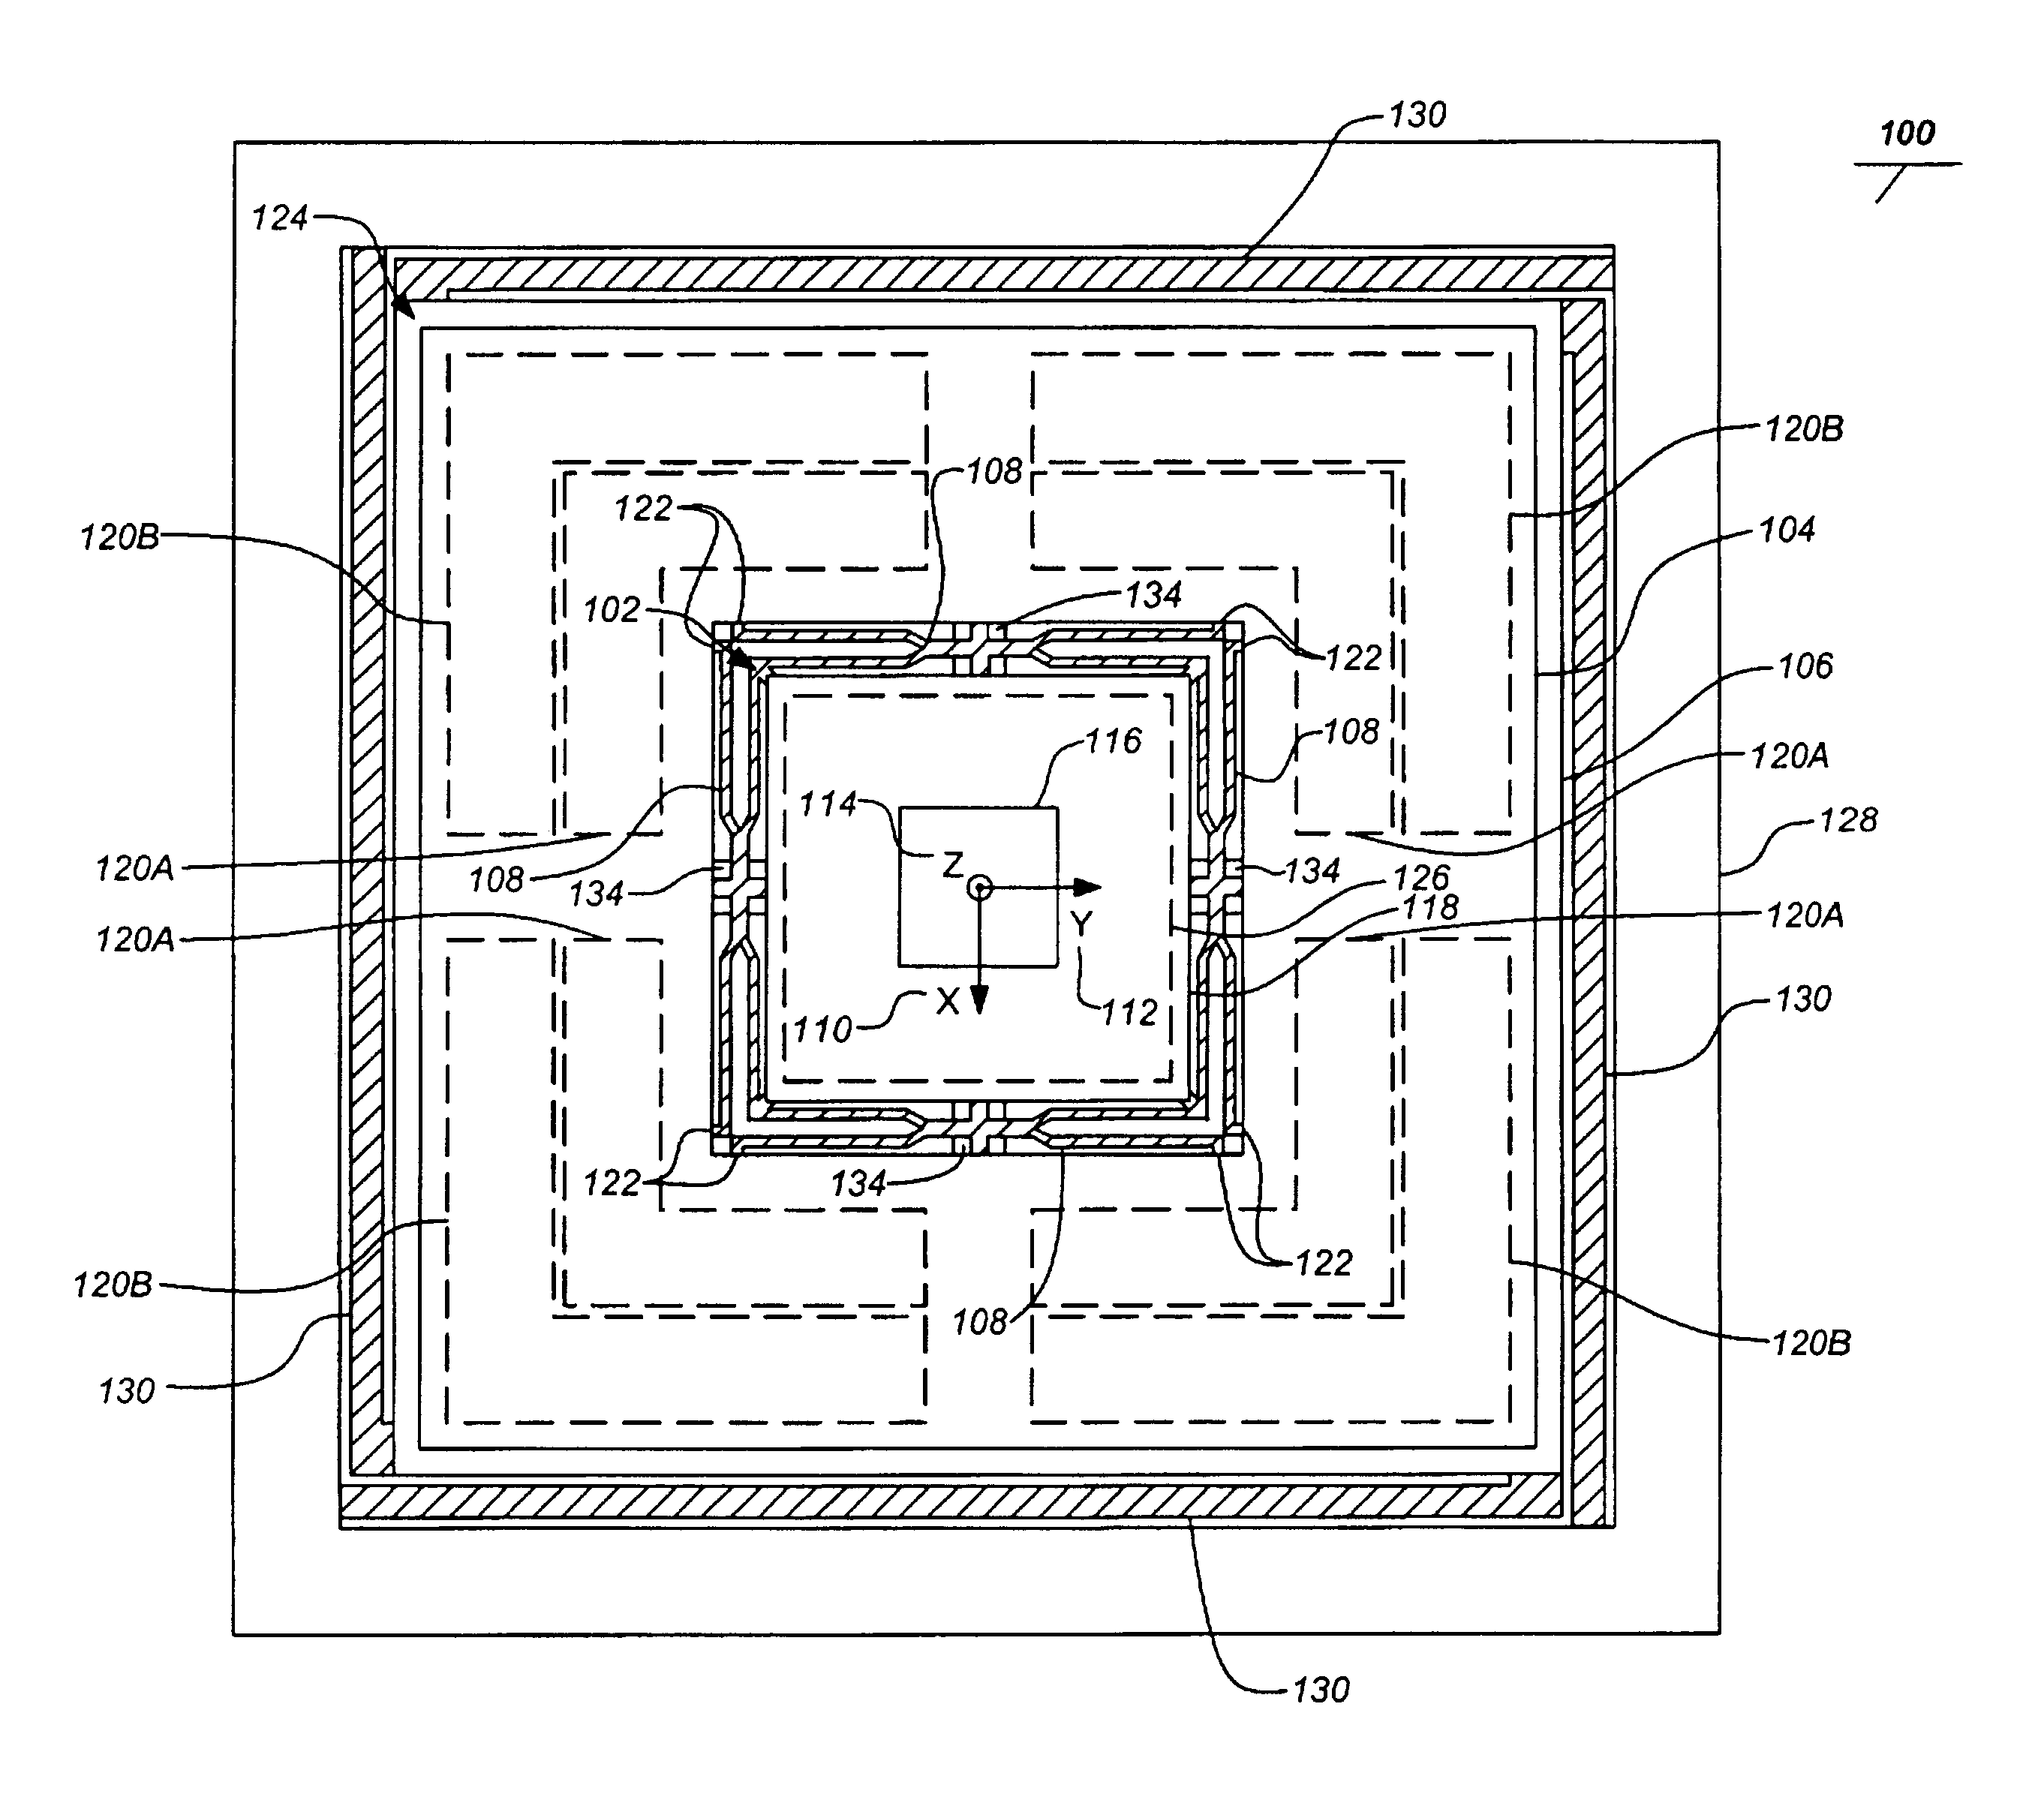 Isolated resonator gyroscope with compact flexures